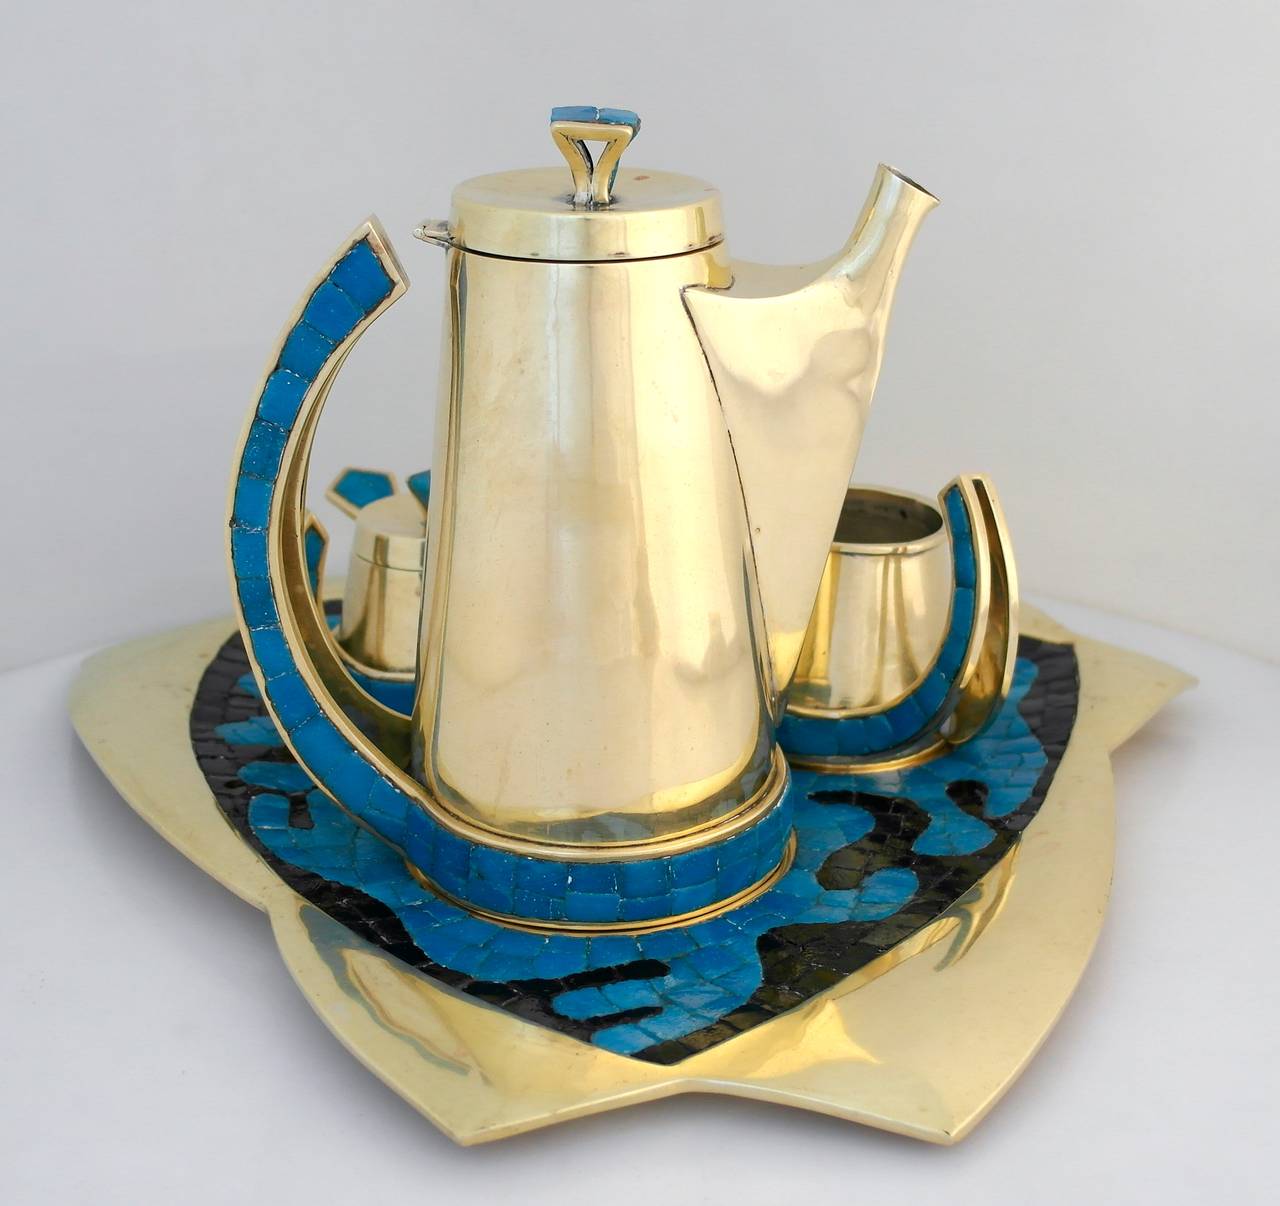 Rare Salvador Teran Modernist Coffee Service circa 1970 Hand-Wrought Brass Tile In Excellent Condition For Sale In New York, NY